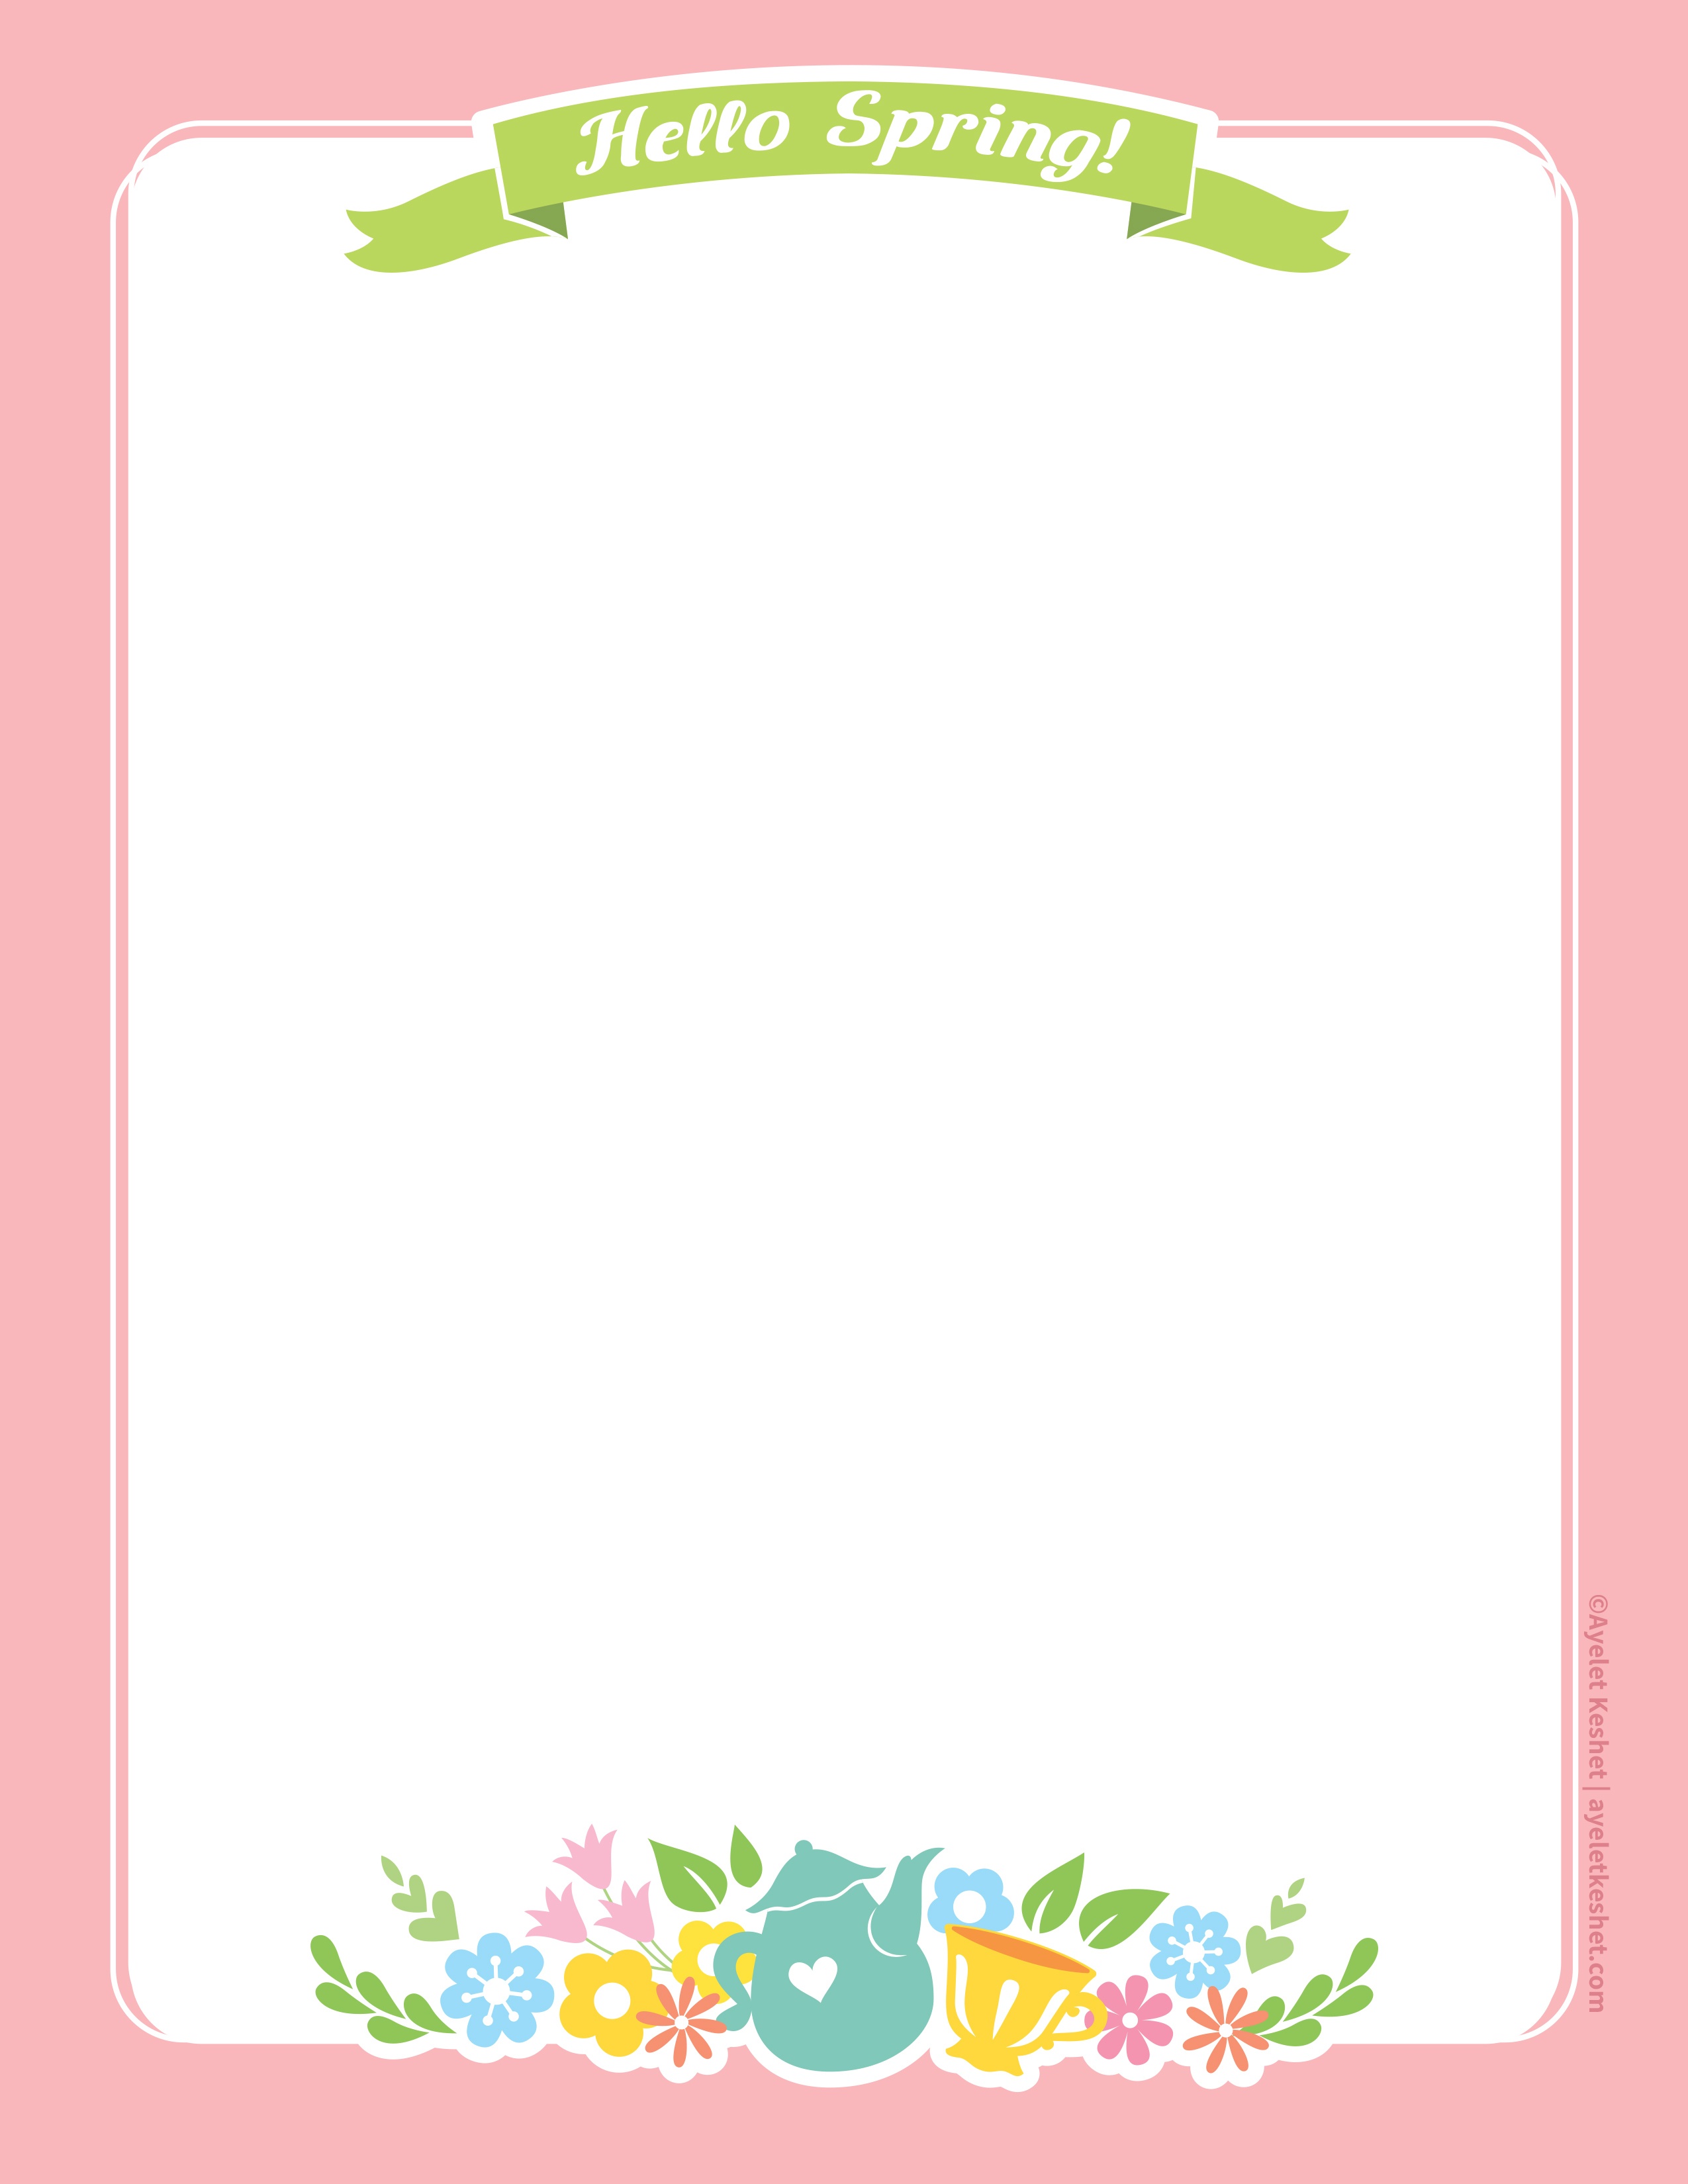 Lovely Free Printable Stationery Paper For Spring - Ayelet Keshet - Free Printable Spring Stationery